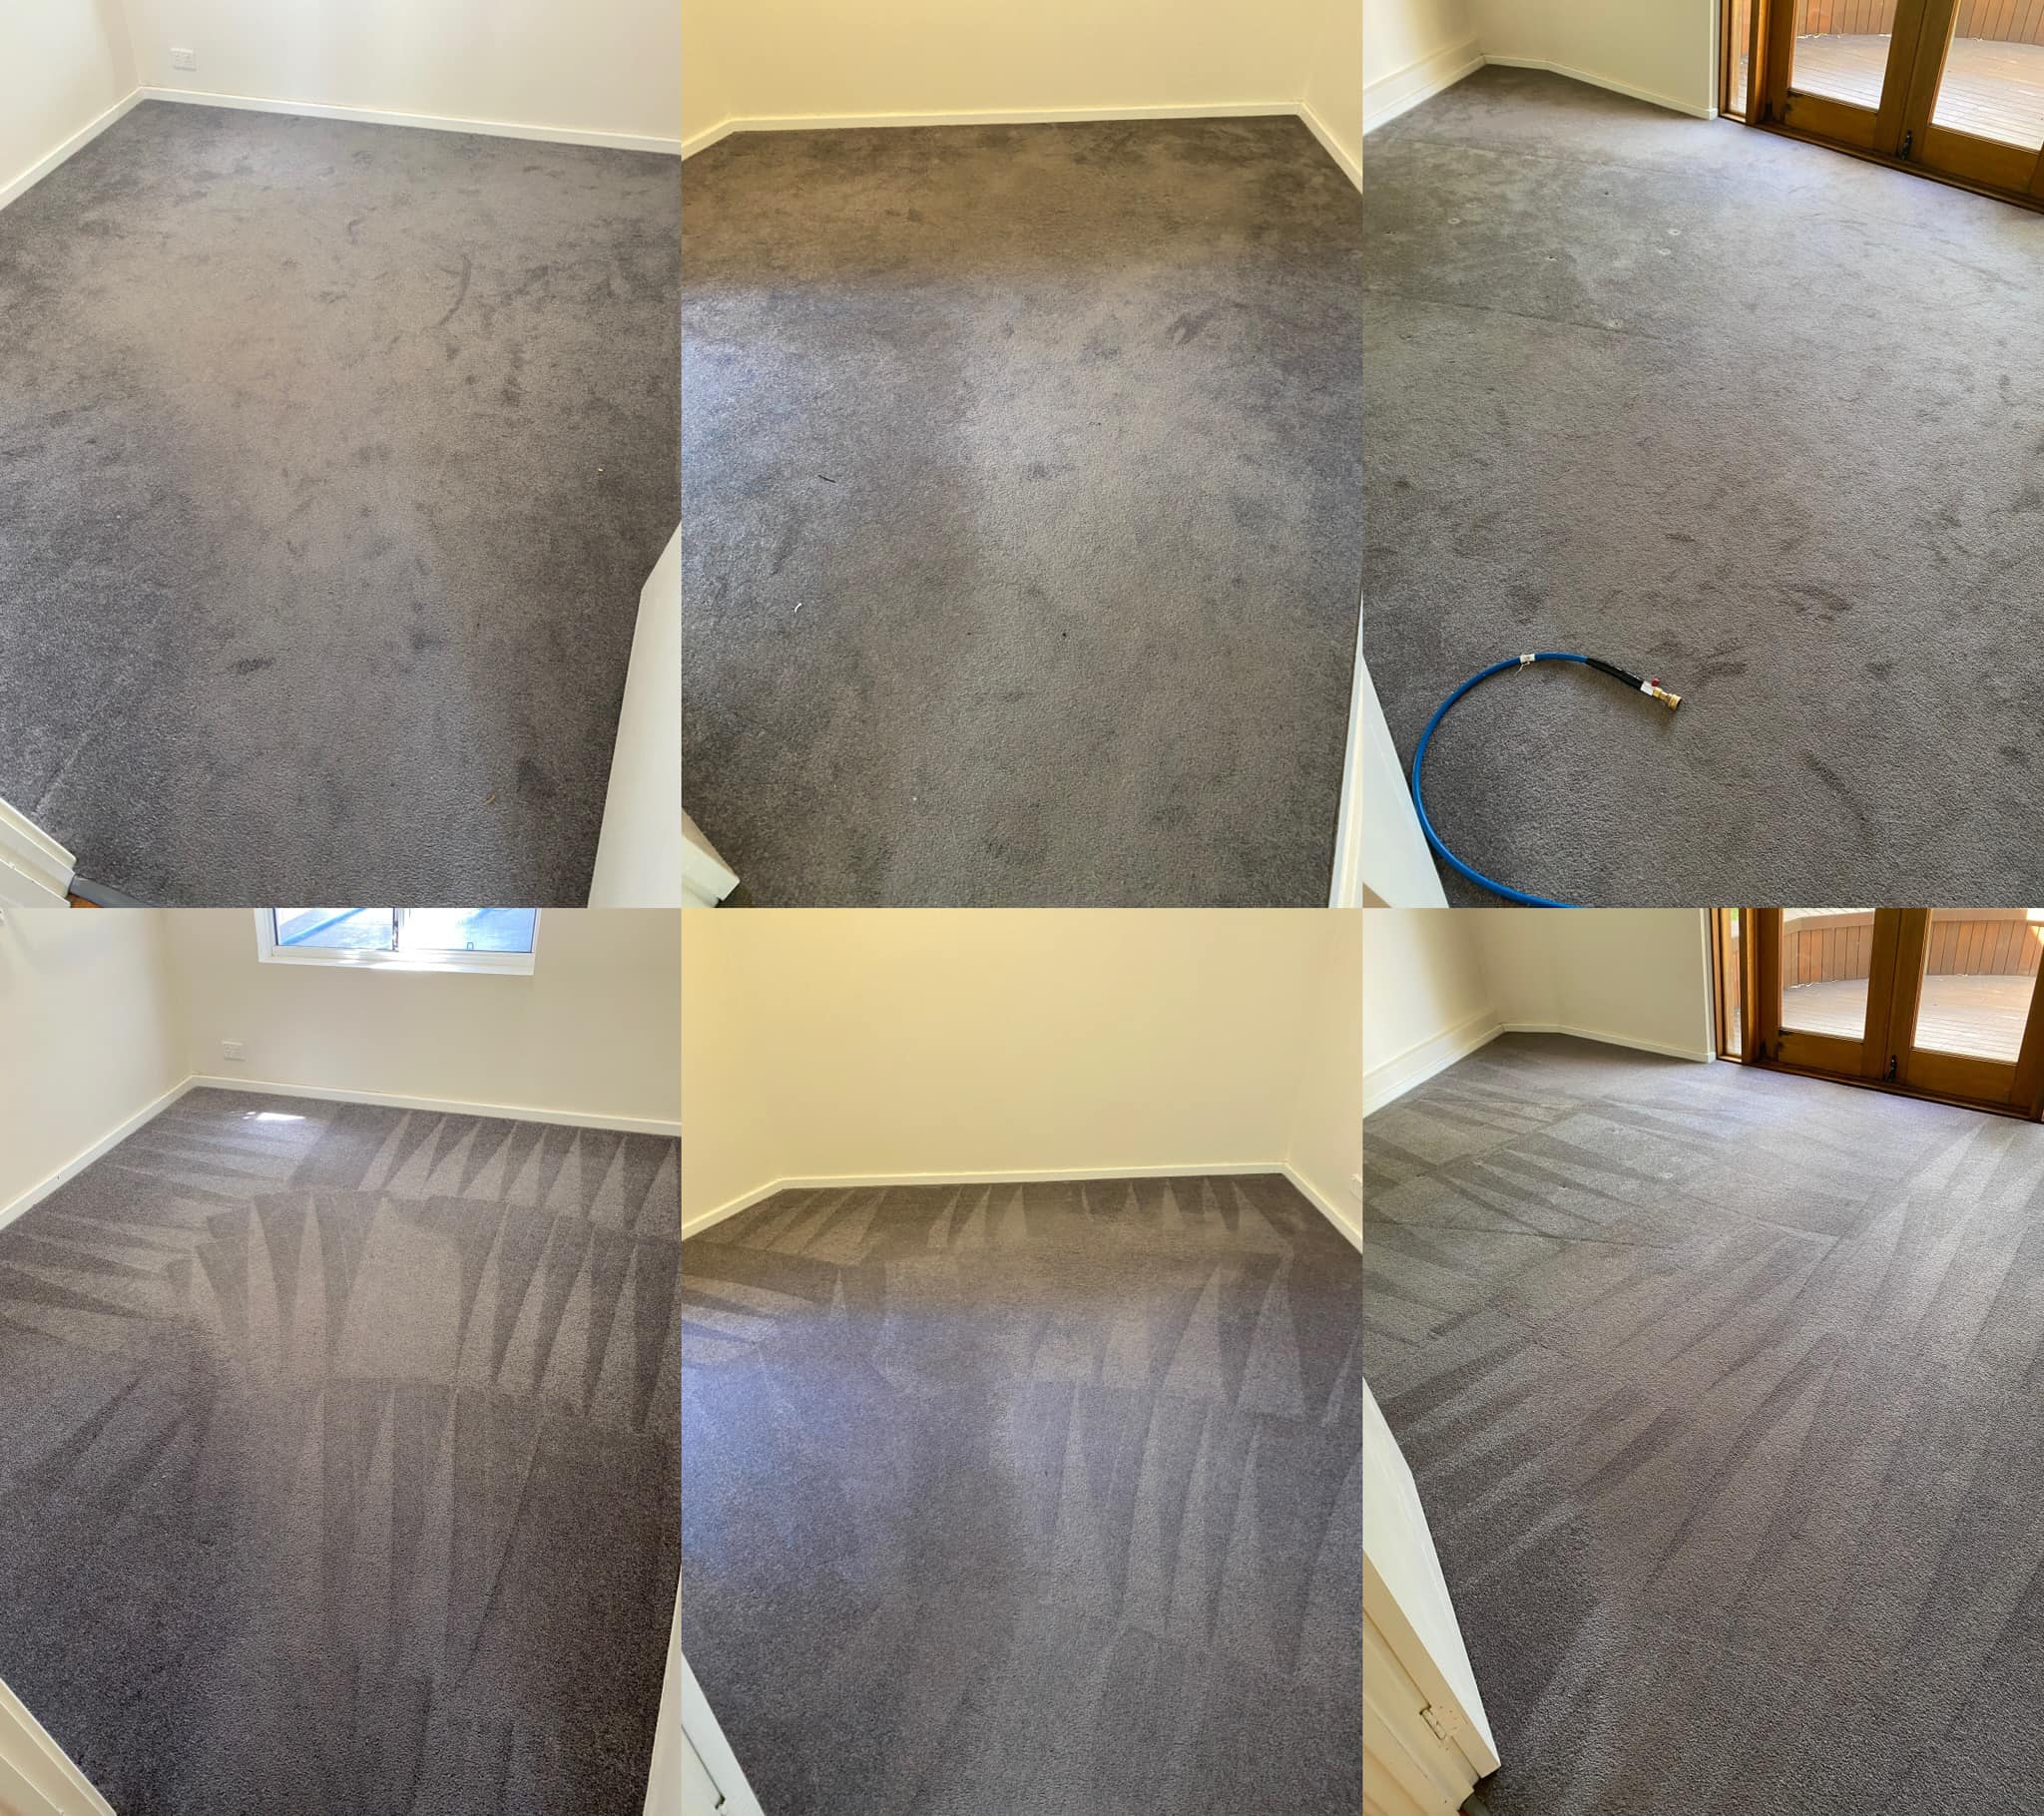 carpet cleaning perth before and after photo cleaning grey carpet at domestic residence all carpet cleaning solutions 